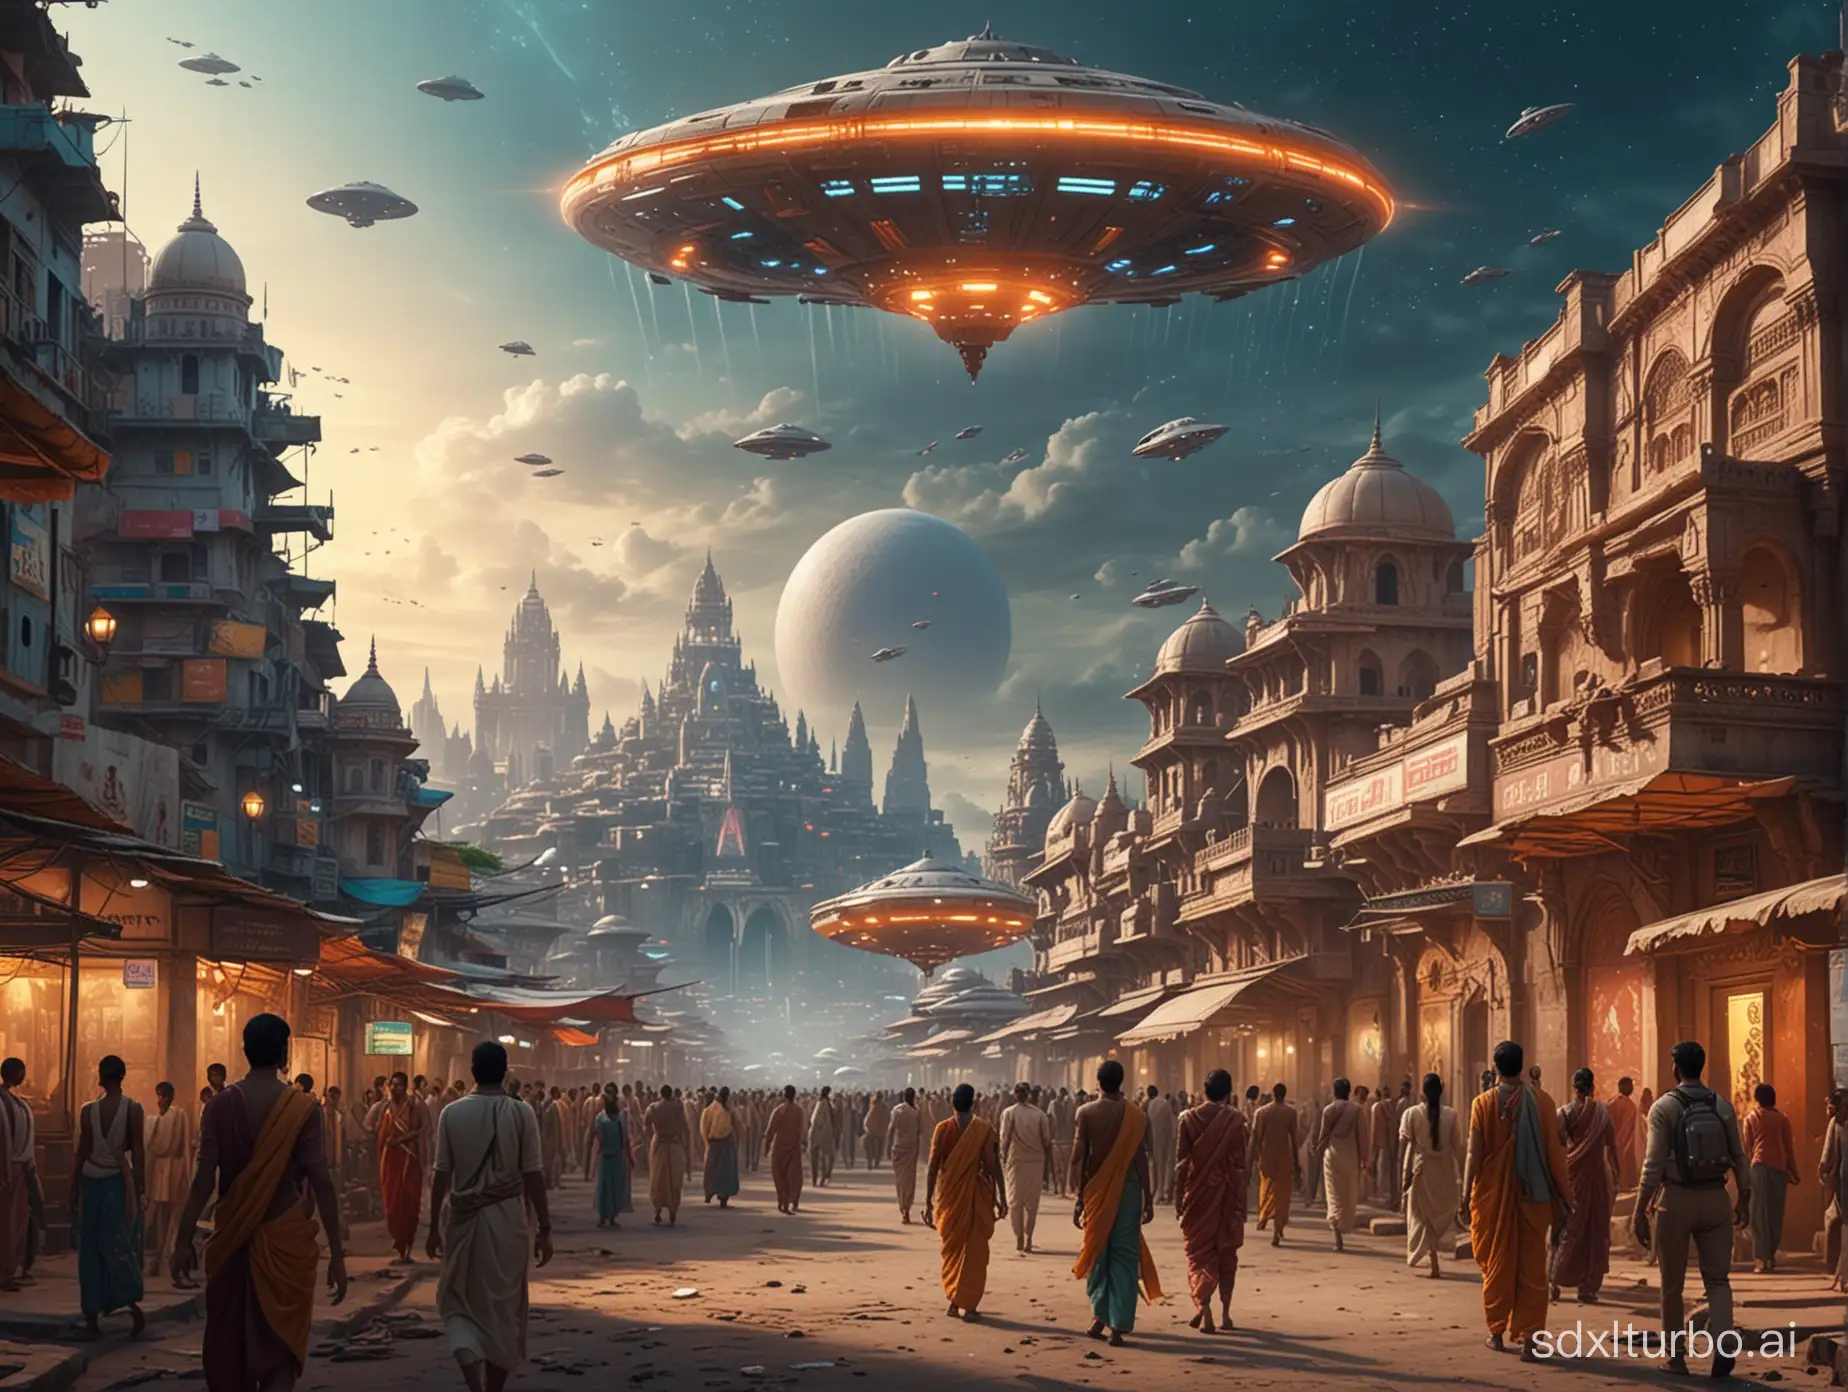 Futuristic-Utopian-City-with-Ancient-Indian-Architecture-and-UFOs-A-Cinematic-SciFi-Spectacle